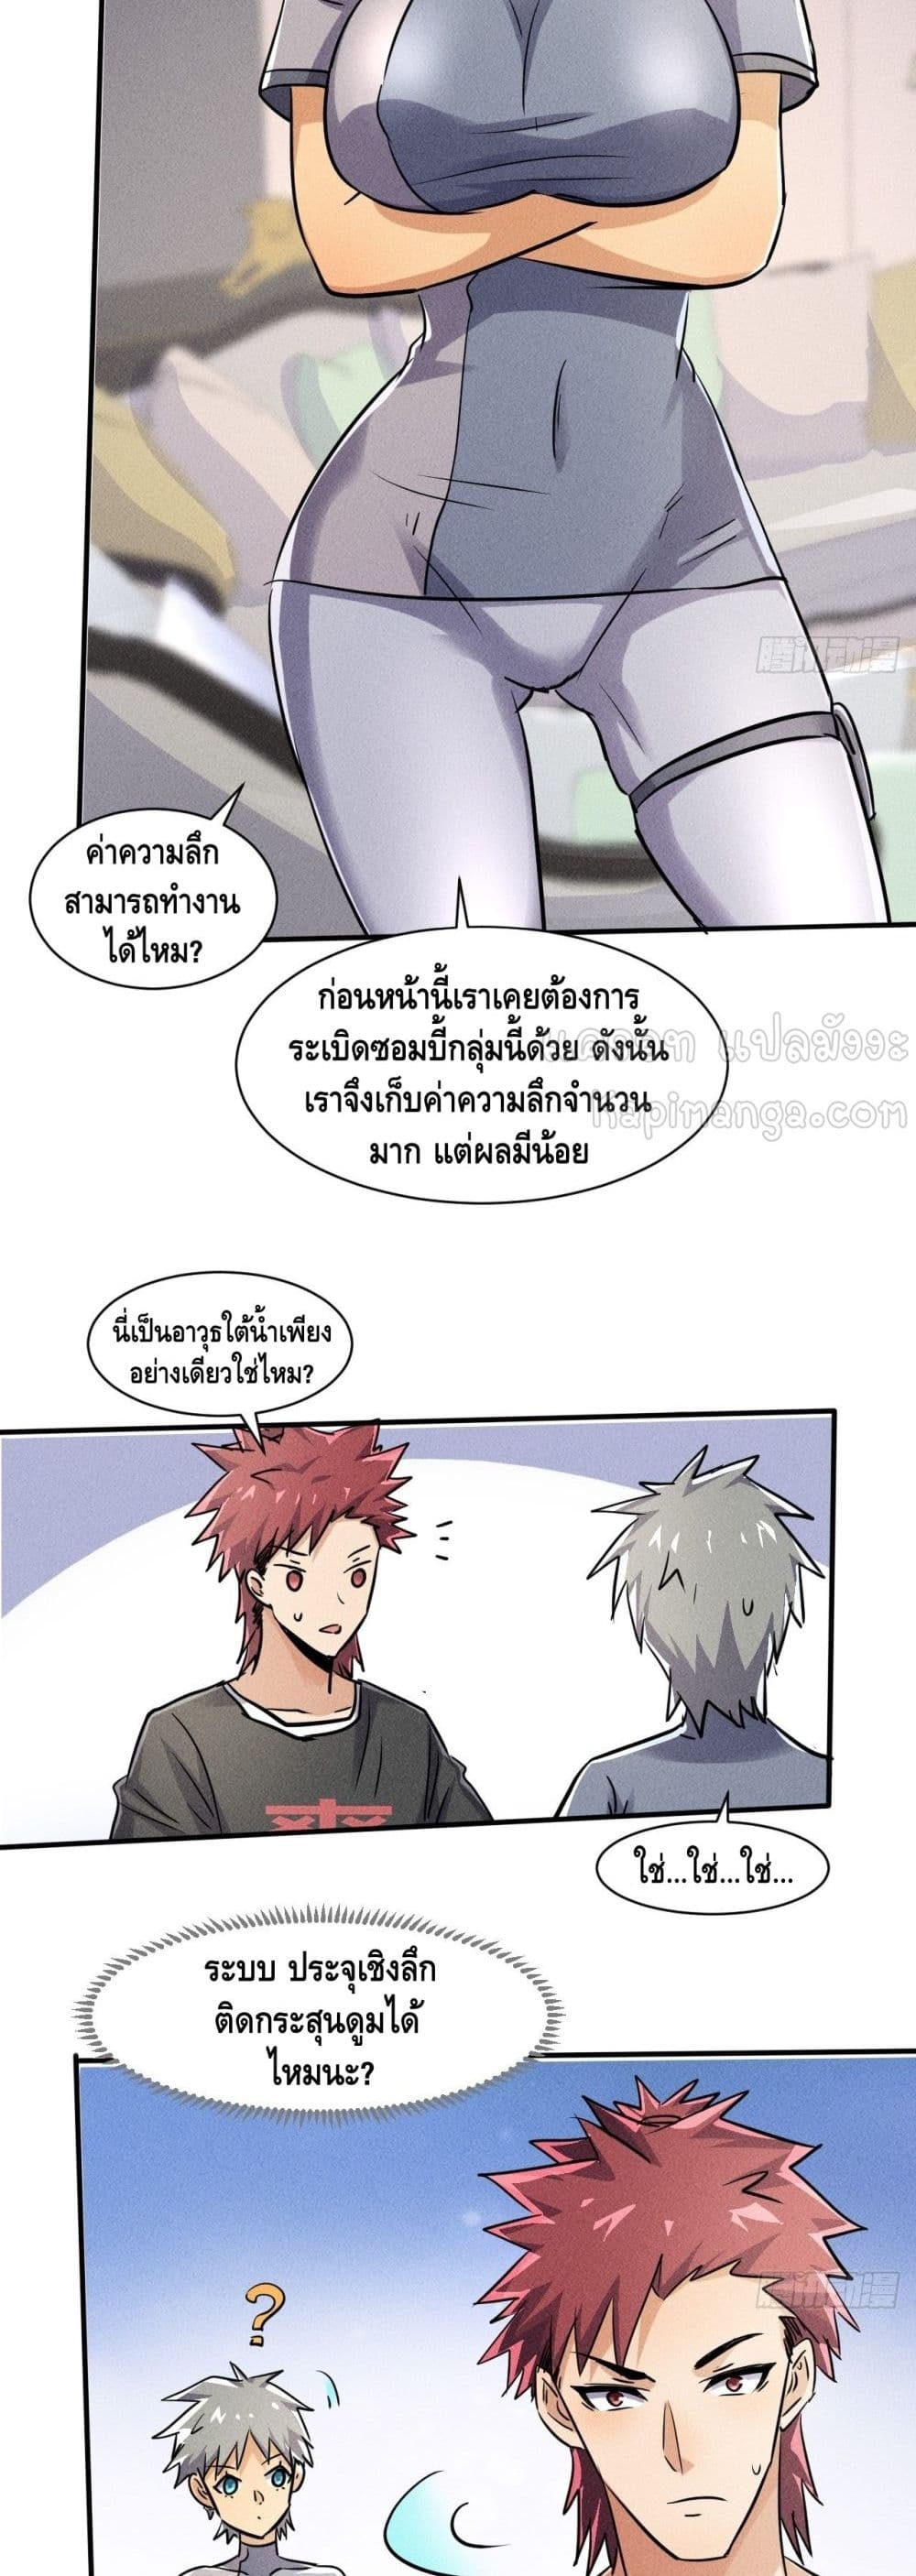 A Golden Palace in the Last Days ตอนที่ 52 (18)